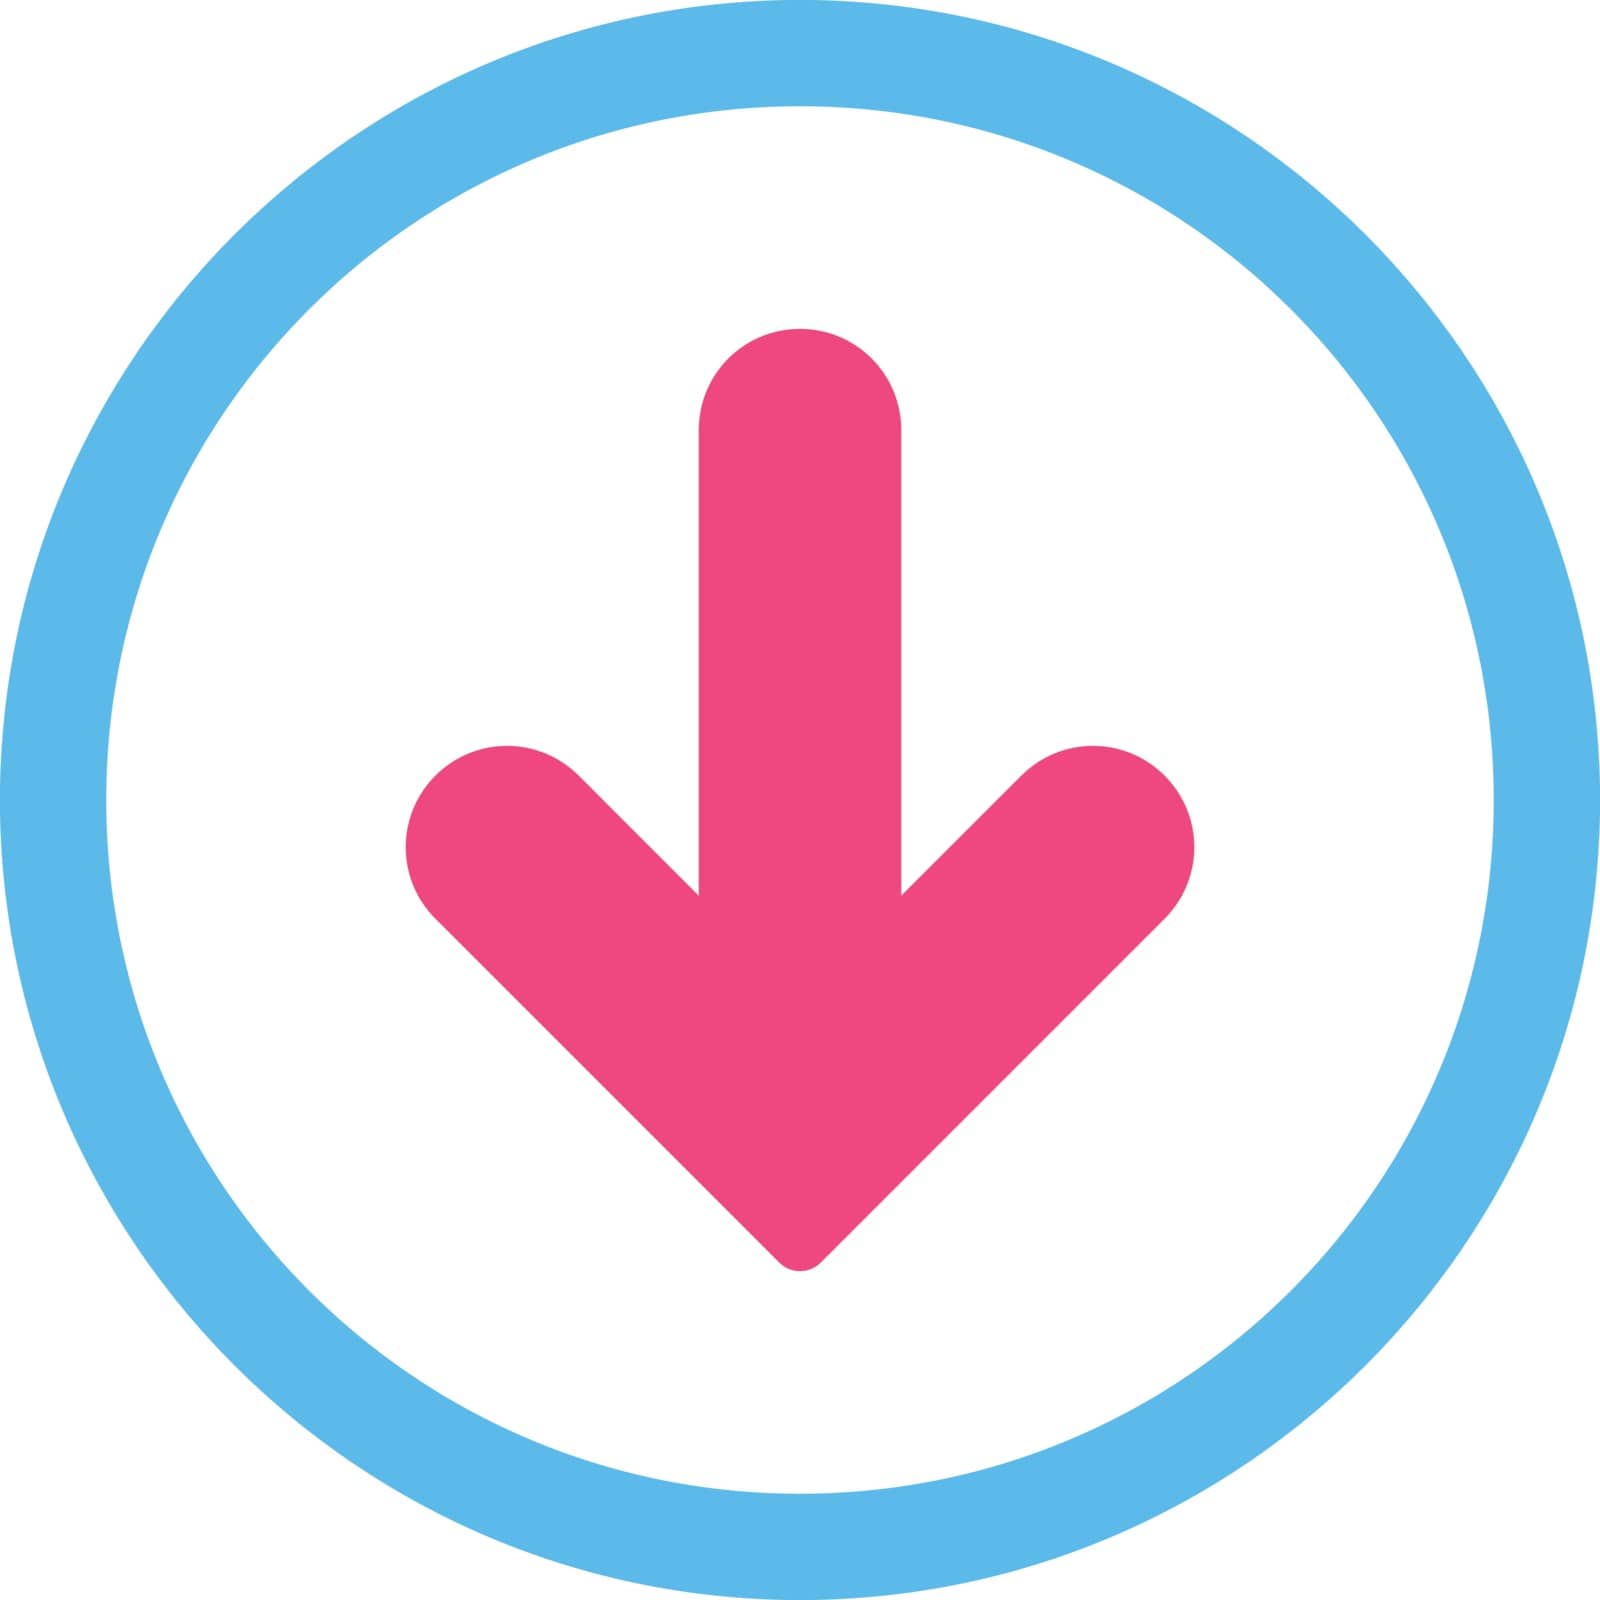 Arrow Down vector icon. This rounded flat symbol is drawn with pink and blue colors on a white background.